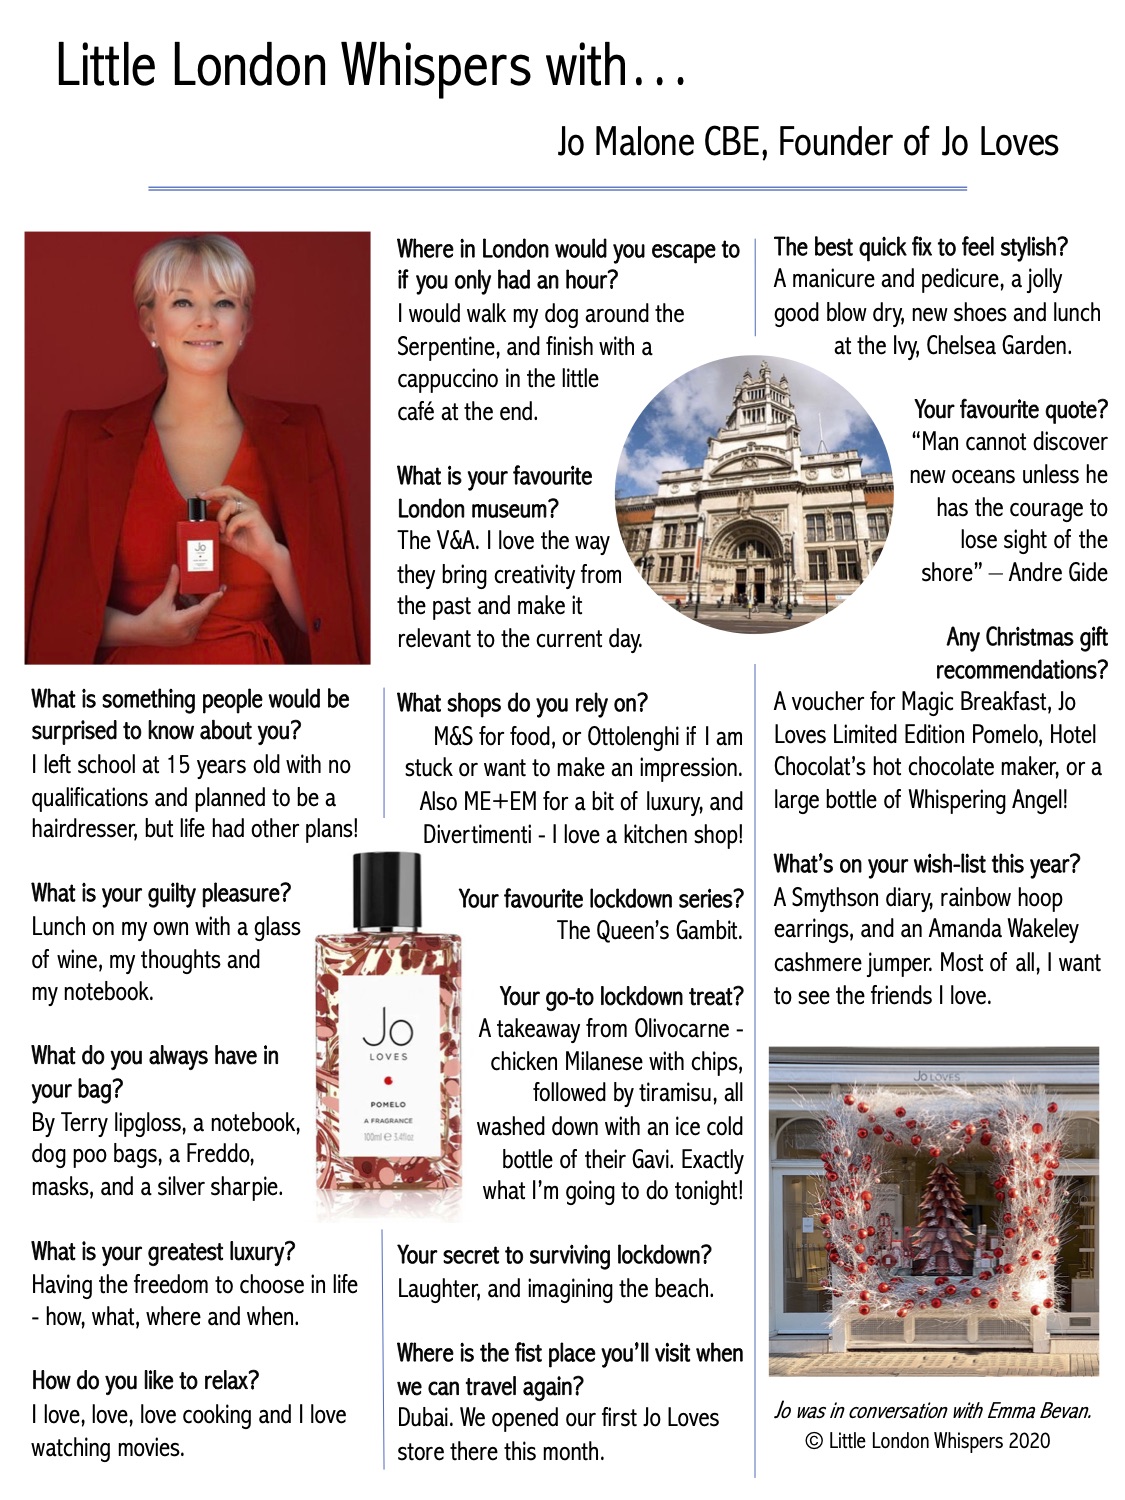 Little London Whispers with Jo Malone CBE